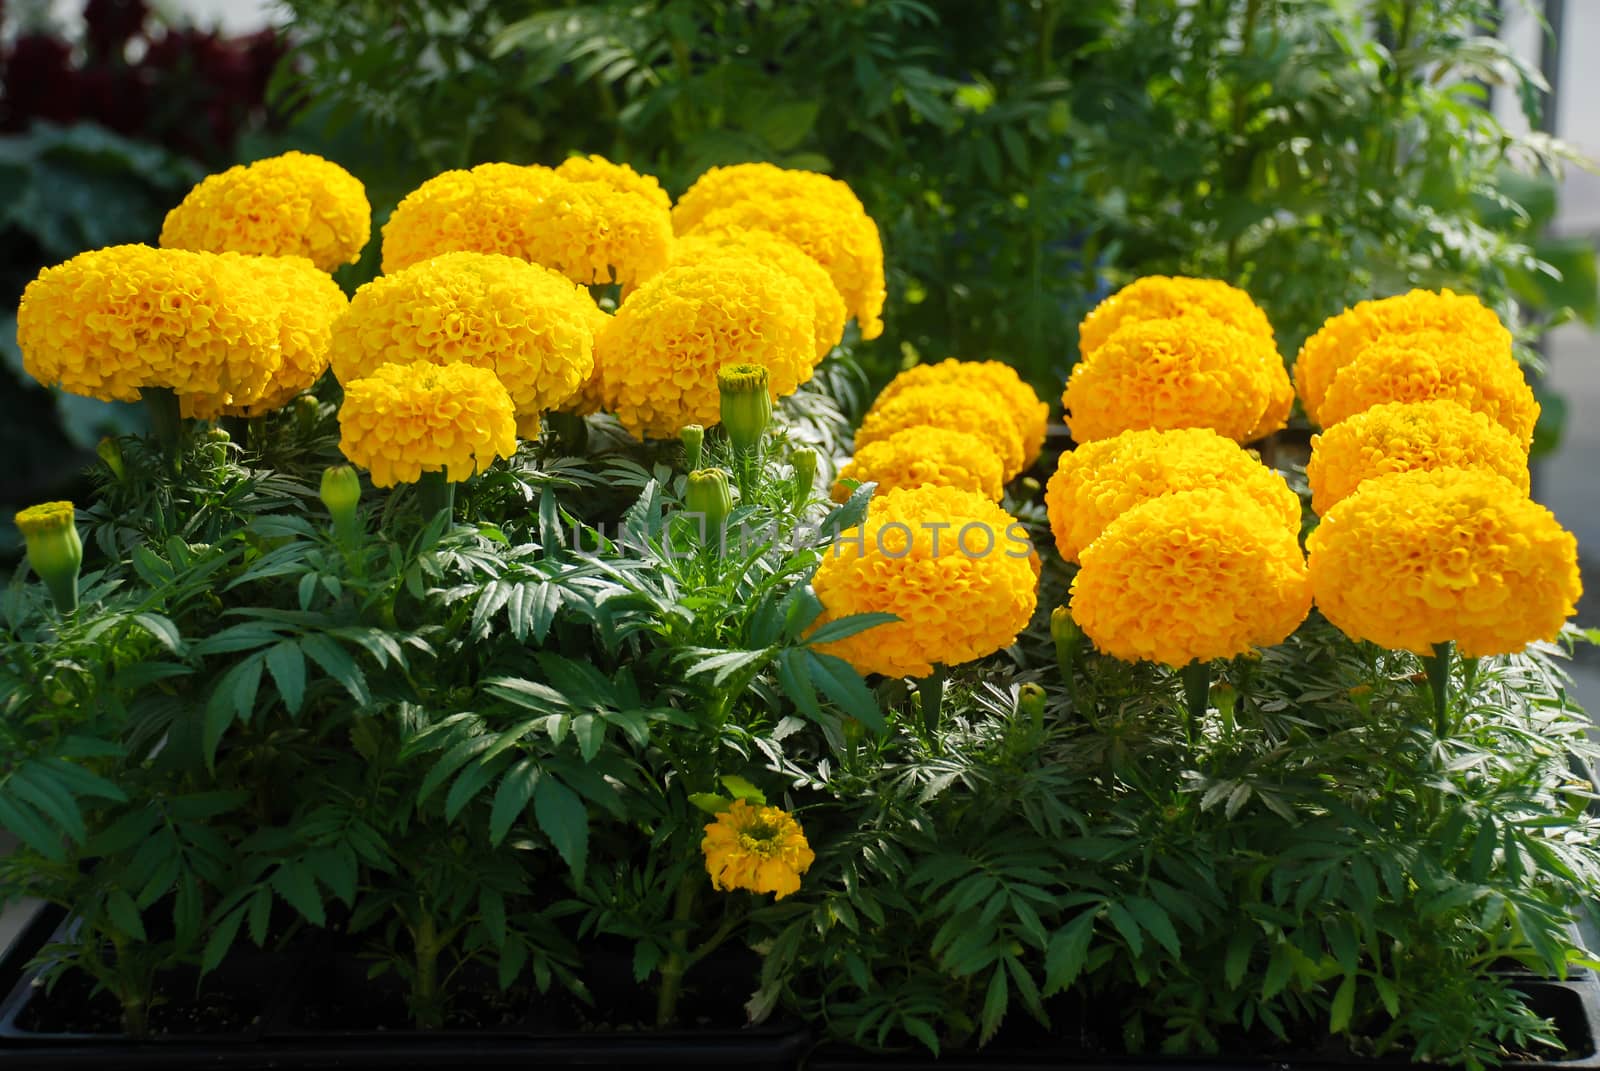 Marigolds Gold Color (Tagetes erecta, Mexican marigold) by yuiyuize